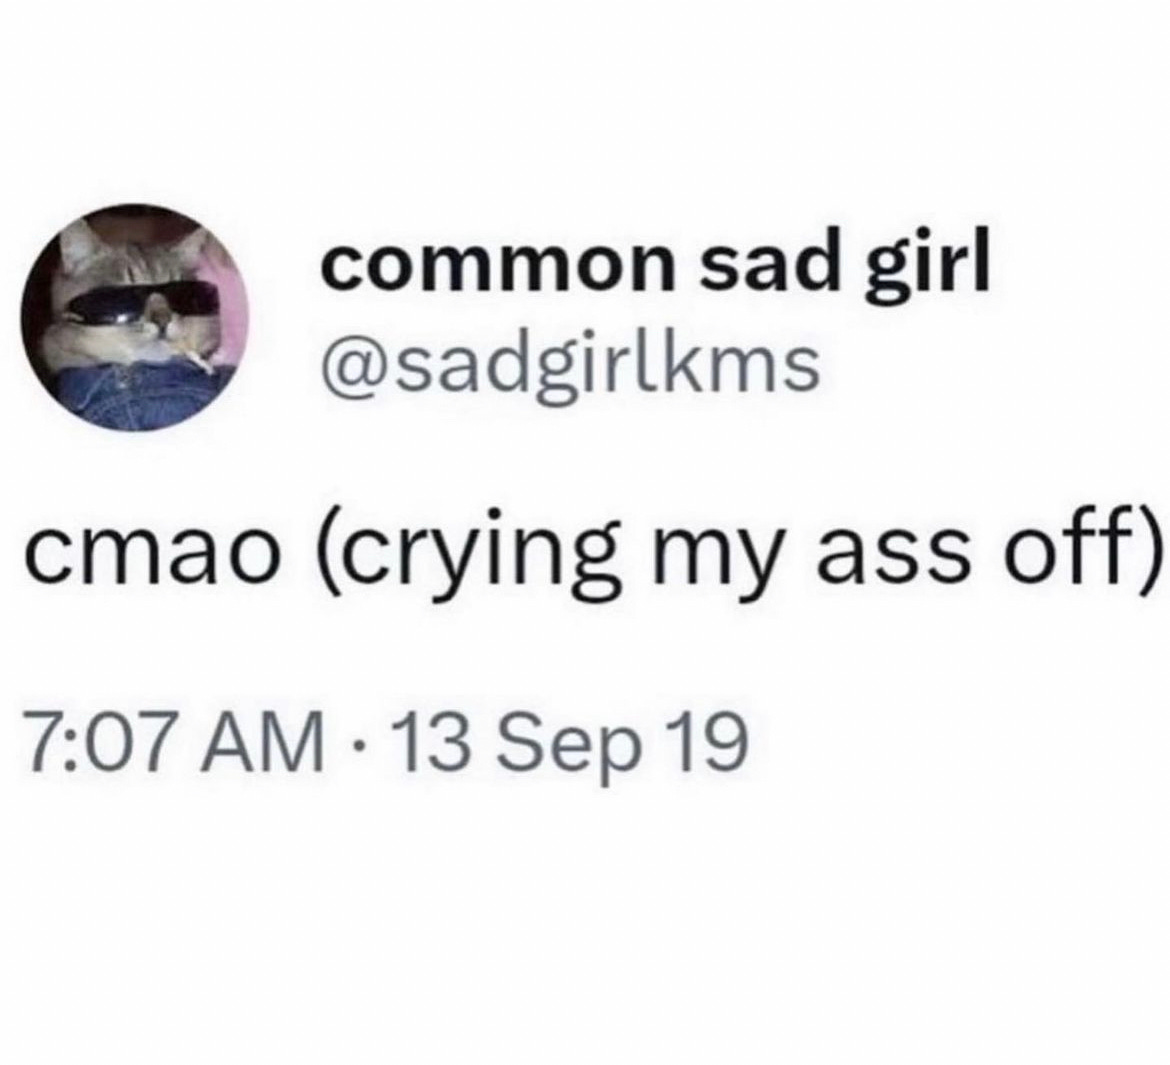 a screenshot of a tweet by common sad girl, @sadgirlkms. a white background with black text that reads: “cmao (crying my ass off) 7:07 am - 13 sep 19” next to an avatar of a cat wearing sunglasses and a denim jacket while smoking a cigarette.